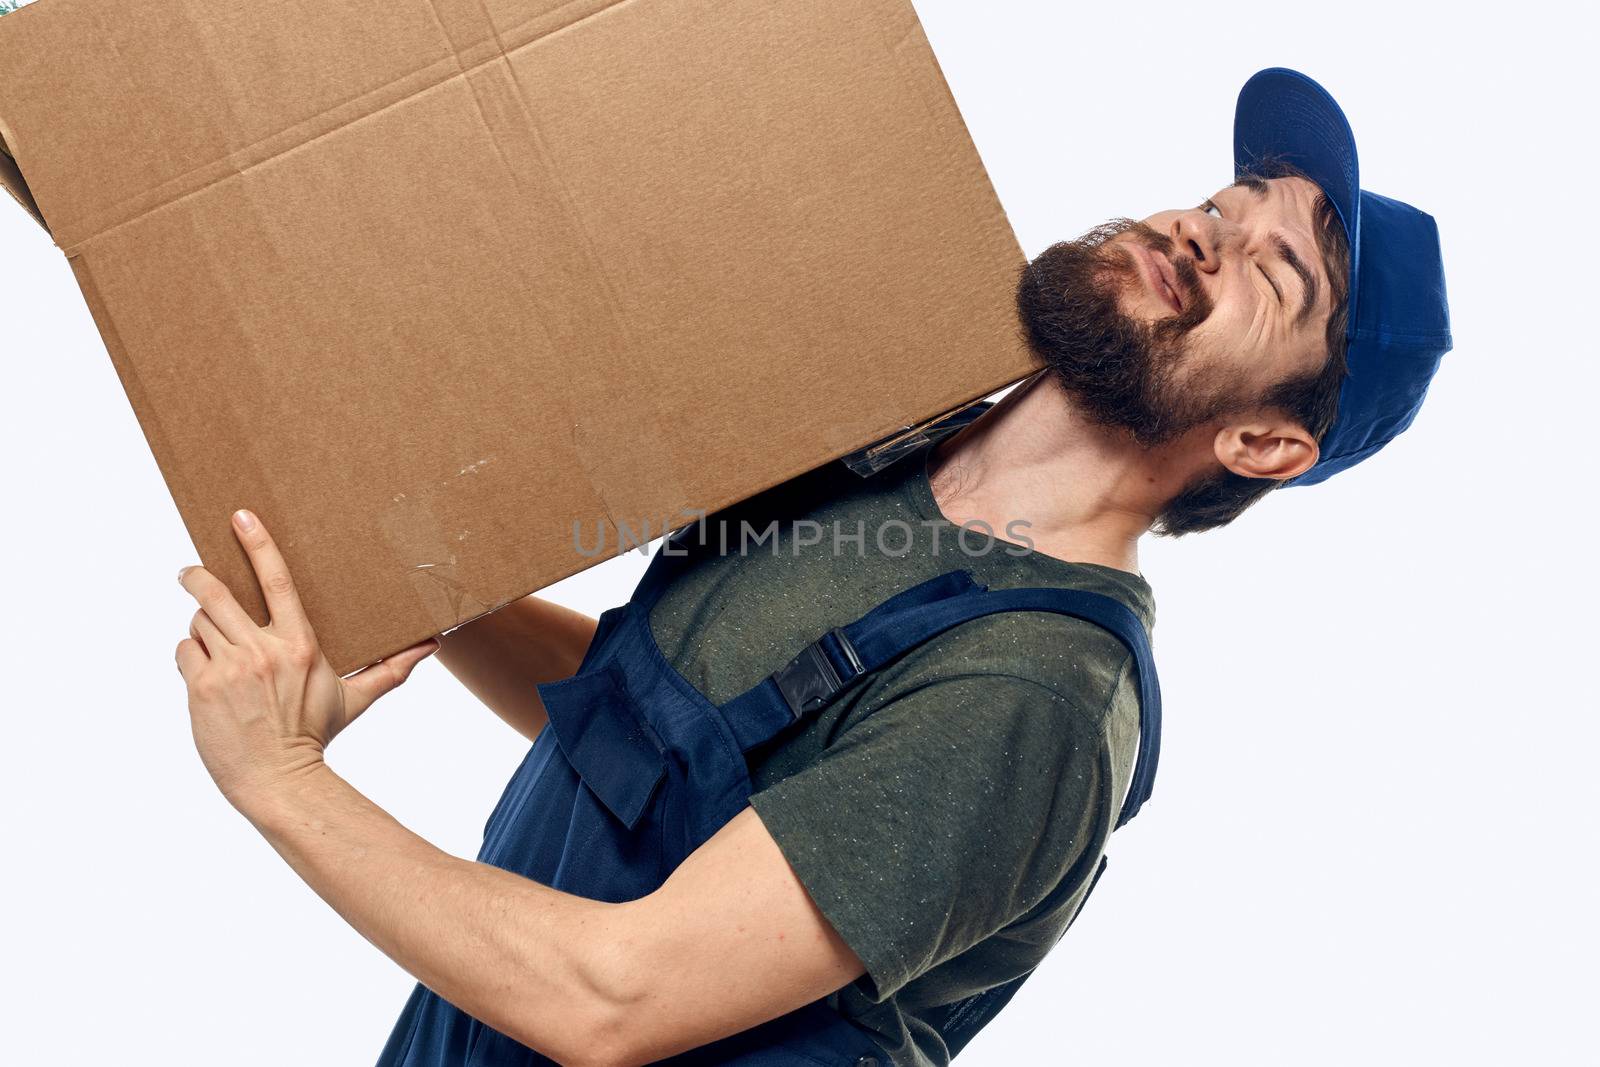 A man in a working uniform with a box in his hands delivery transportation work. High quality photo